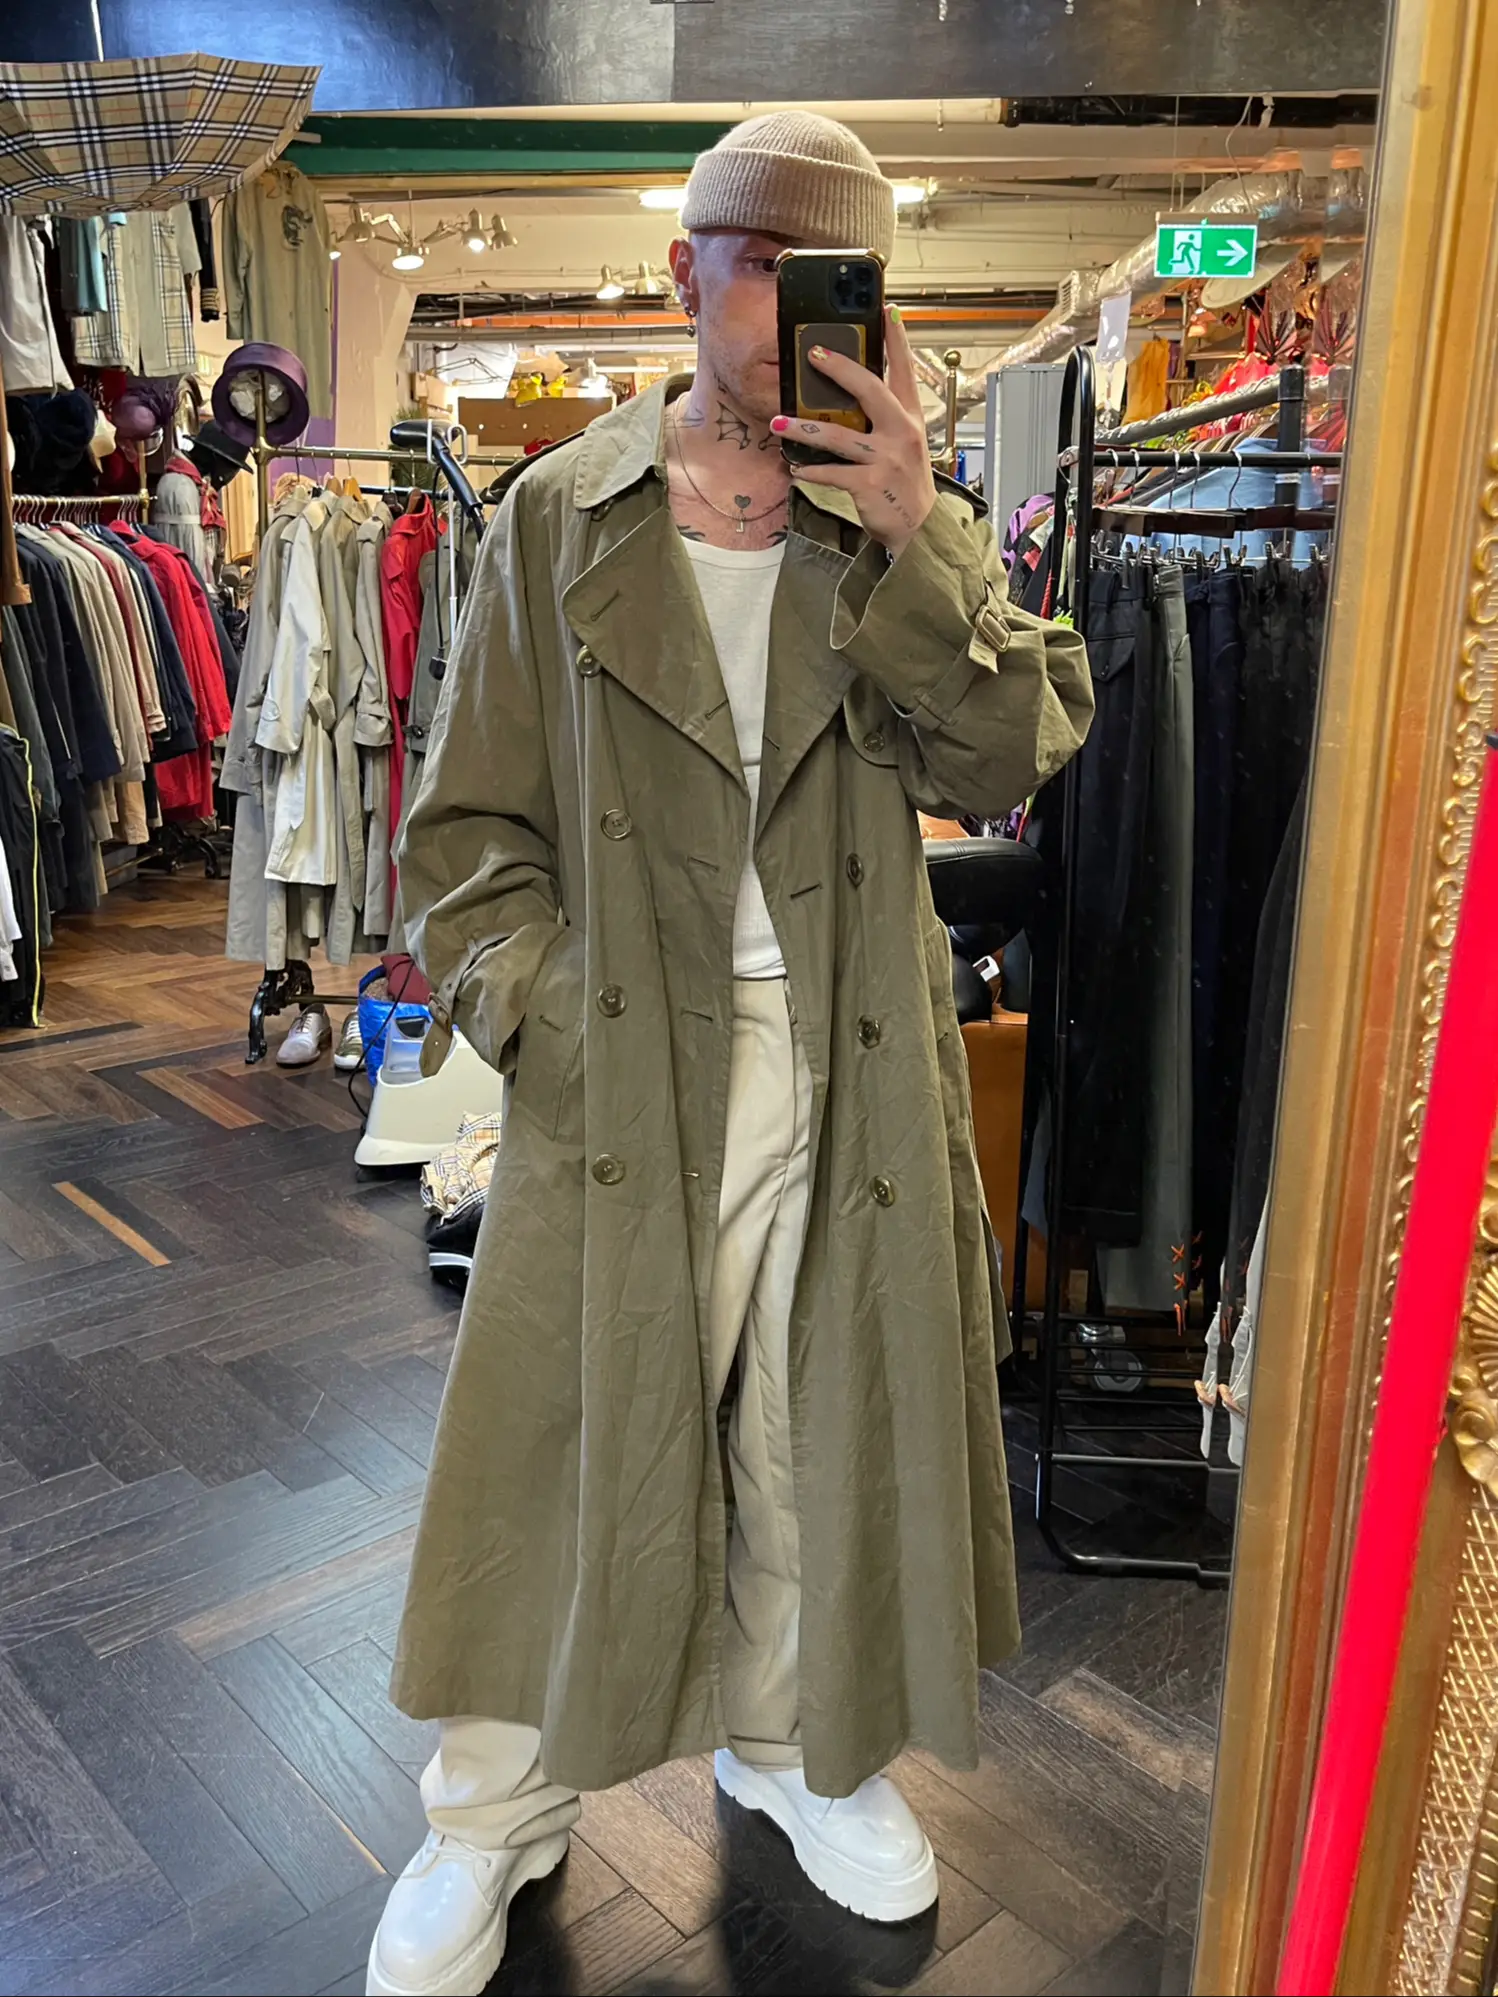 Burberry Trench Coat ~ Vintage Store